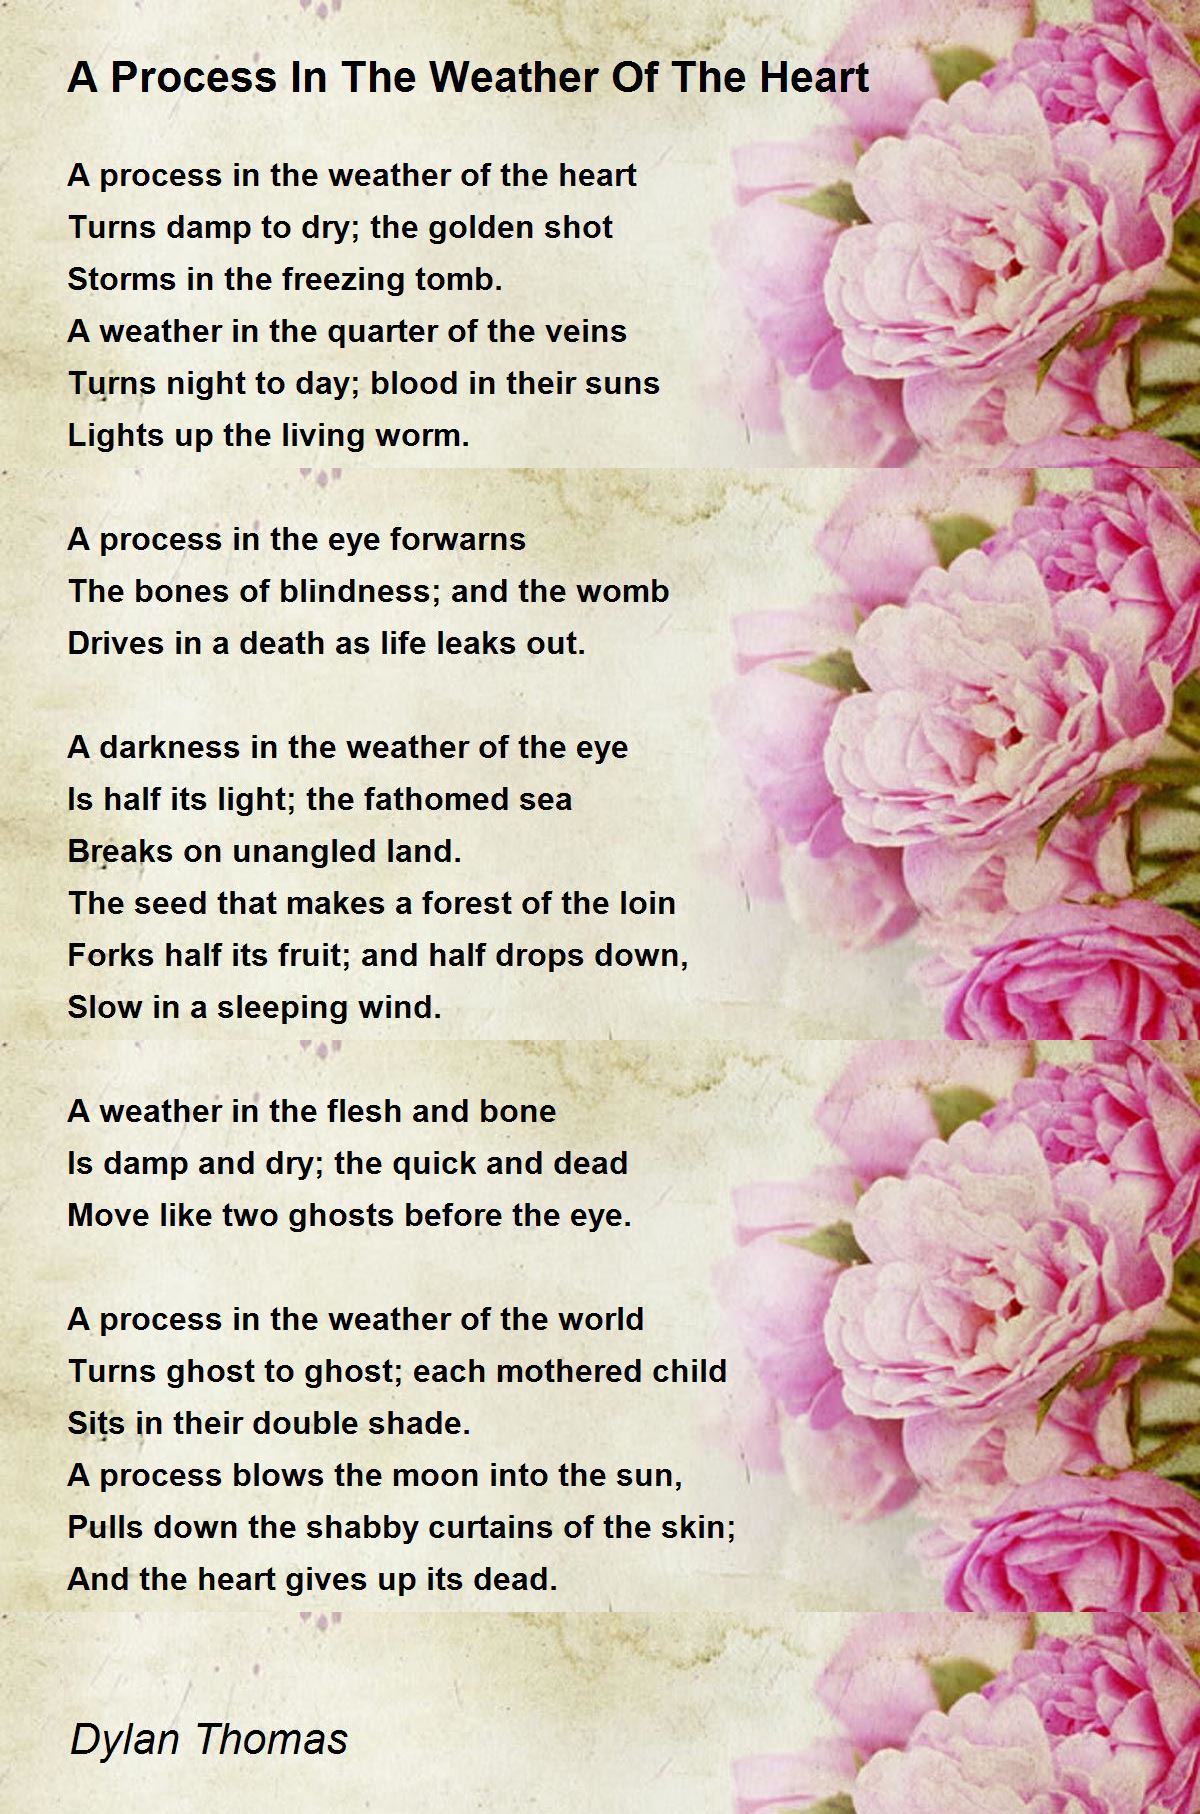 A Process In The Weather Of The Heart Poem by Dylan Thomas 